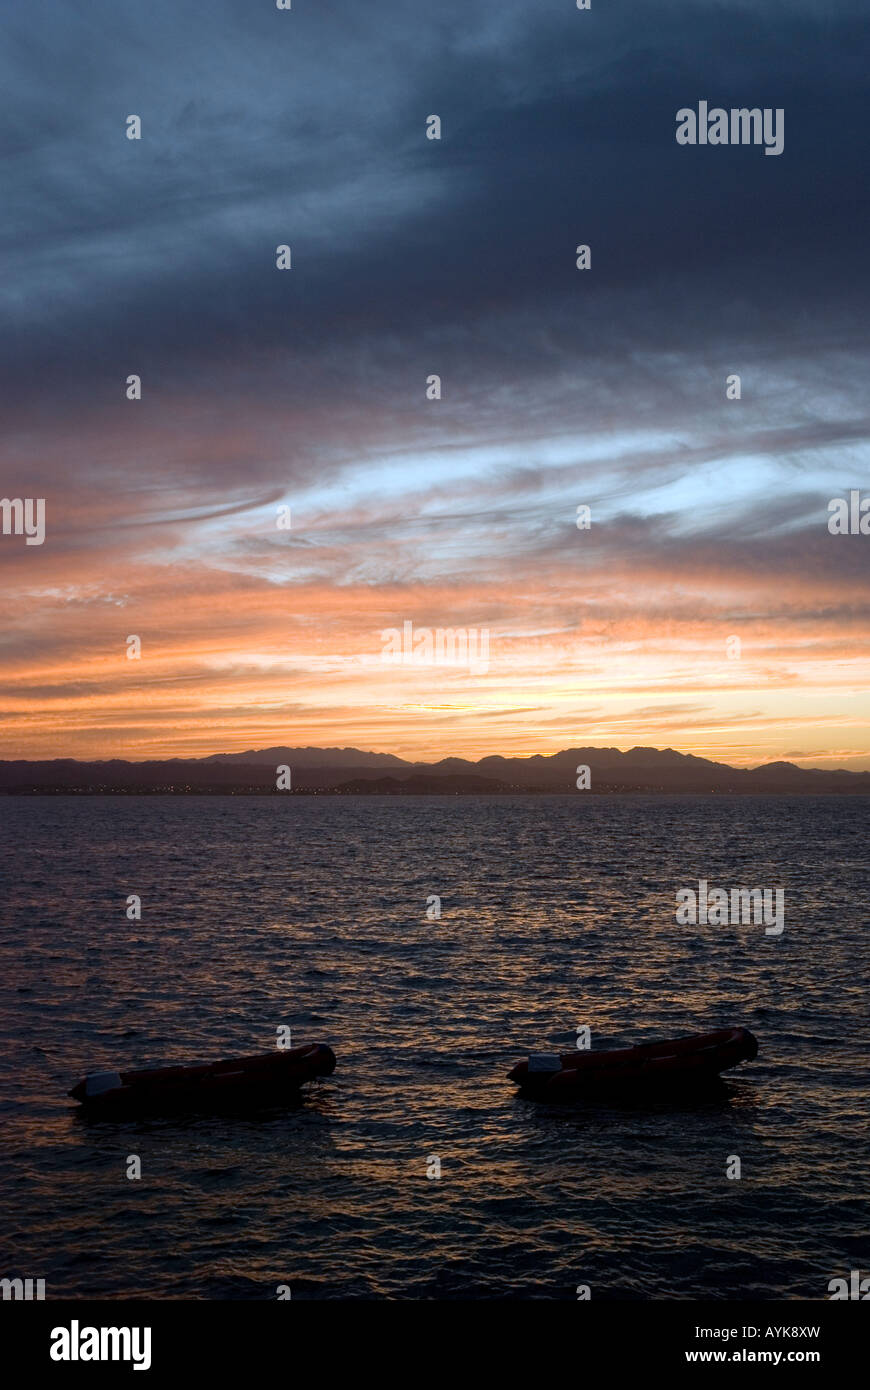 Sunset over the Red Sea, Egypt. Stock Photo